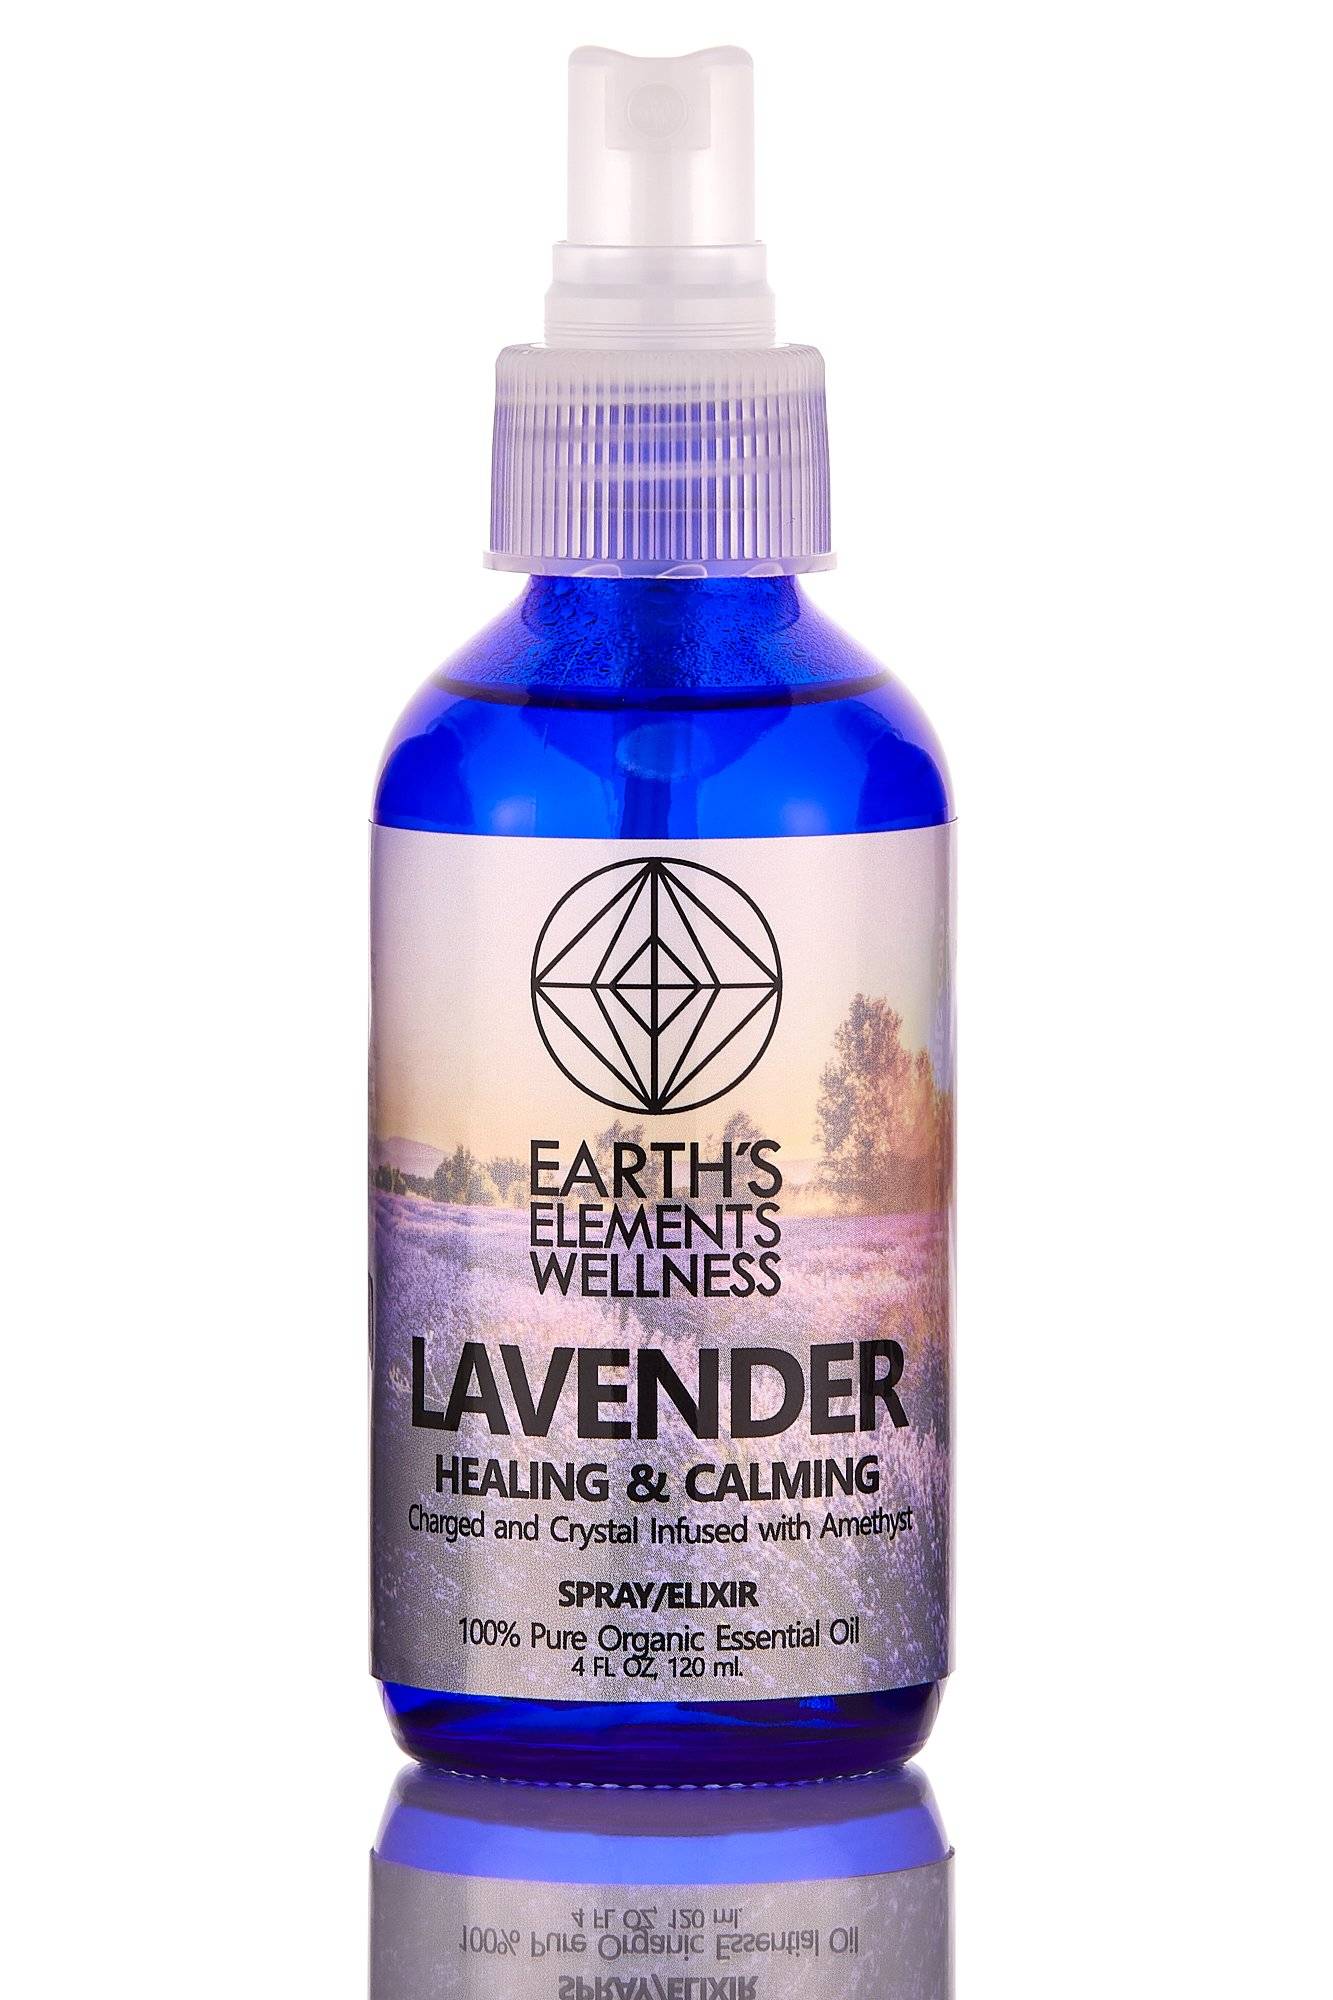 Organic Lavender: Charged and Crystal Infused with Amethyst